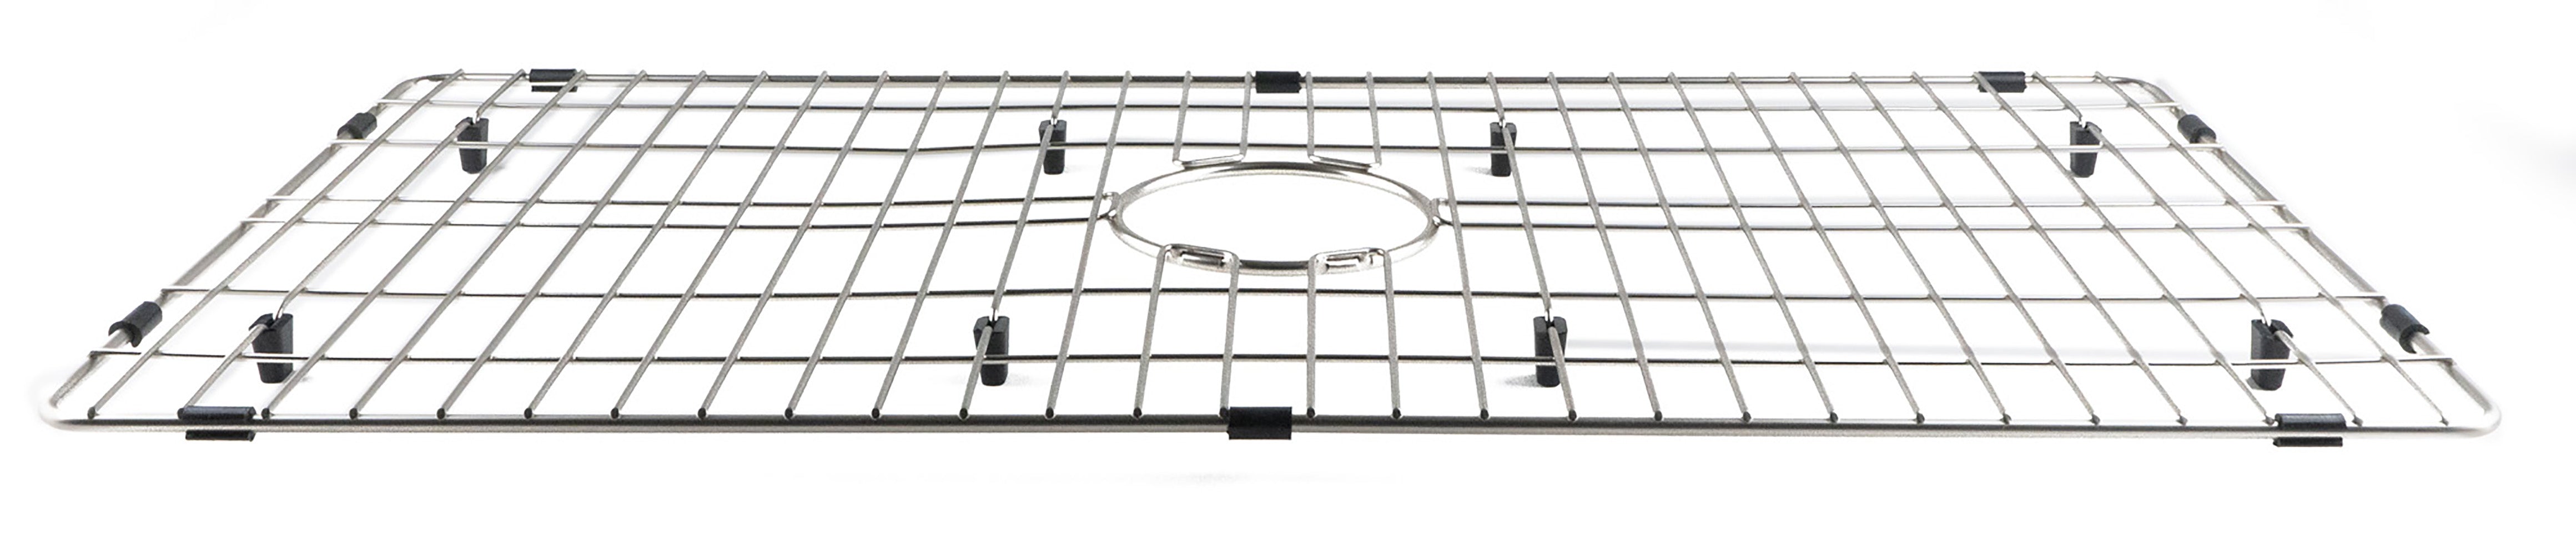 ALFI Brand - Solid Stainless Steel Kitchen Sink Grid for ABF3318S Sink | ABGR33S